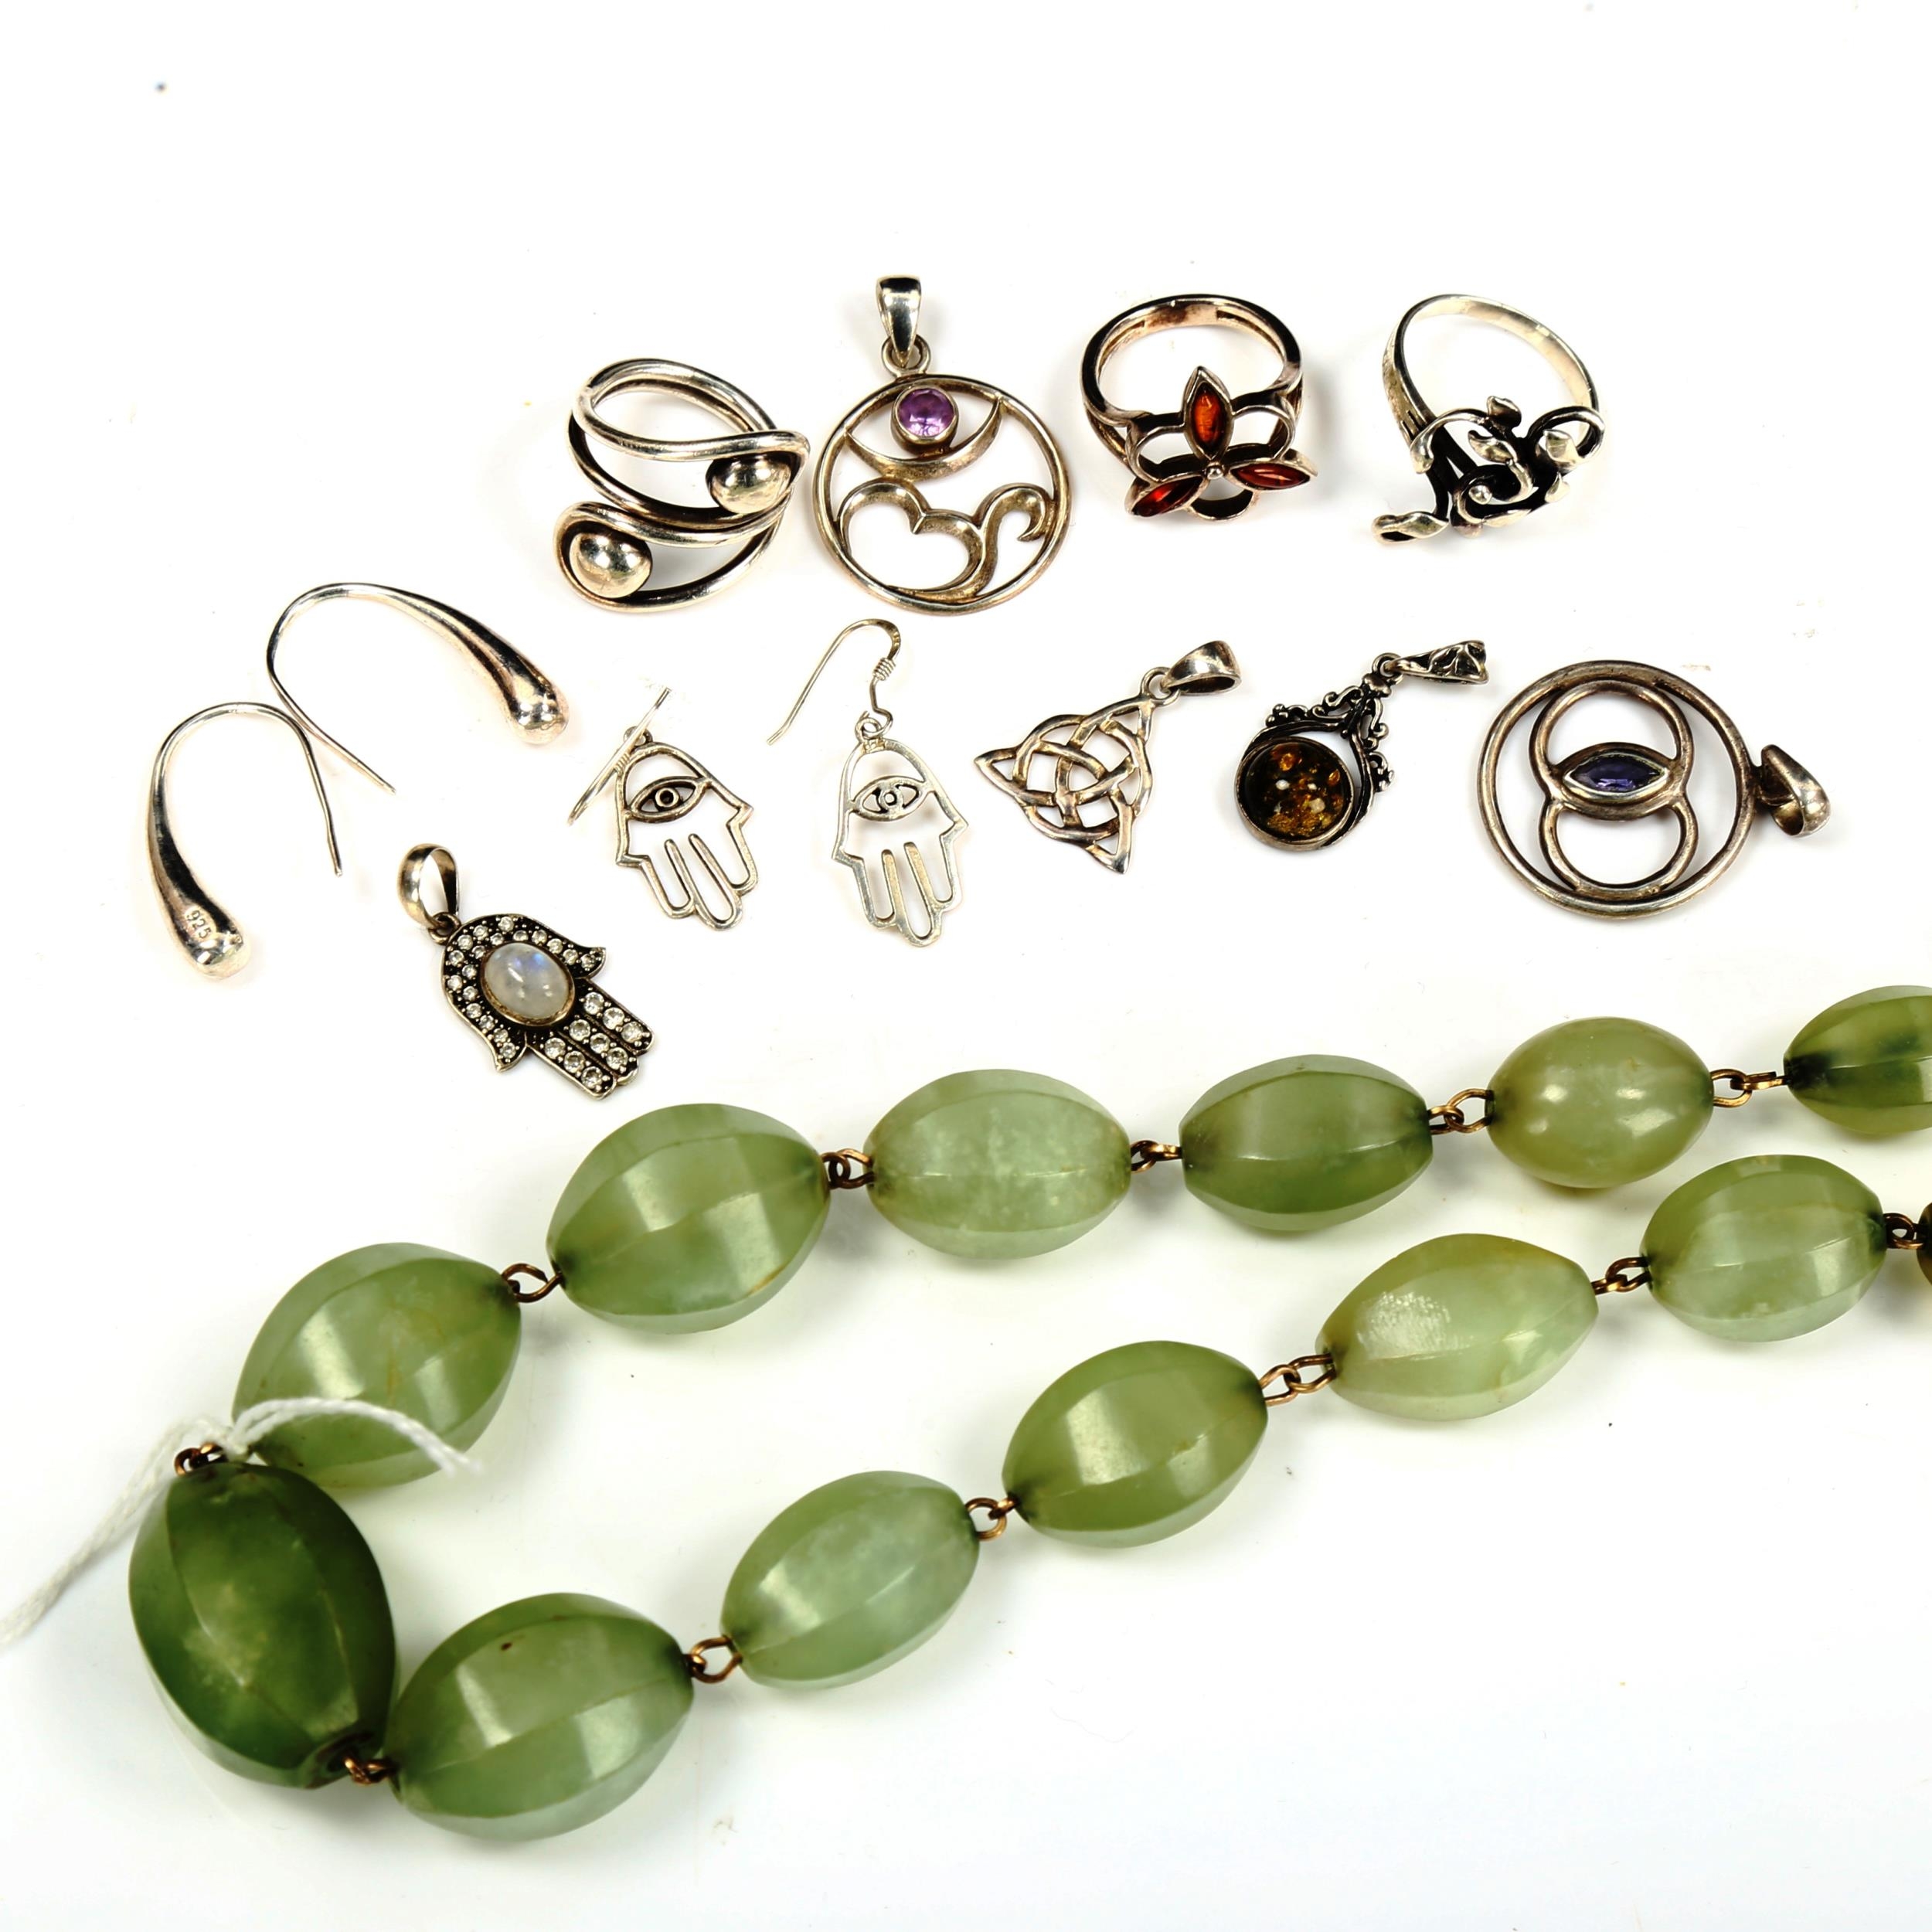 Various silver jewellery and a green hardstone necklace Lot sold as seen unless specific item(s)